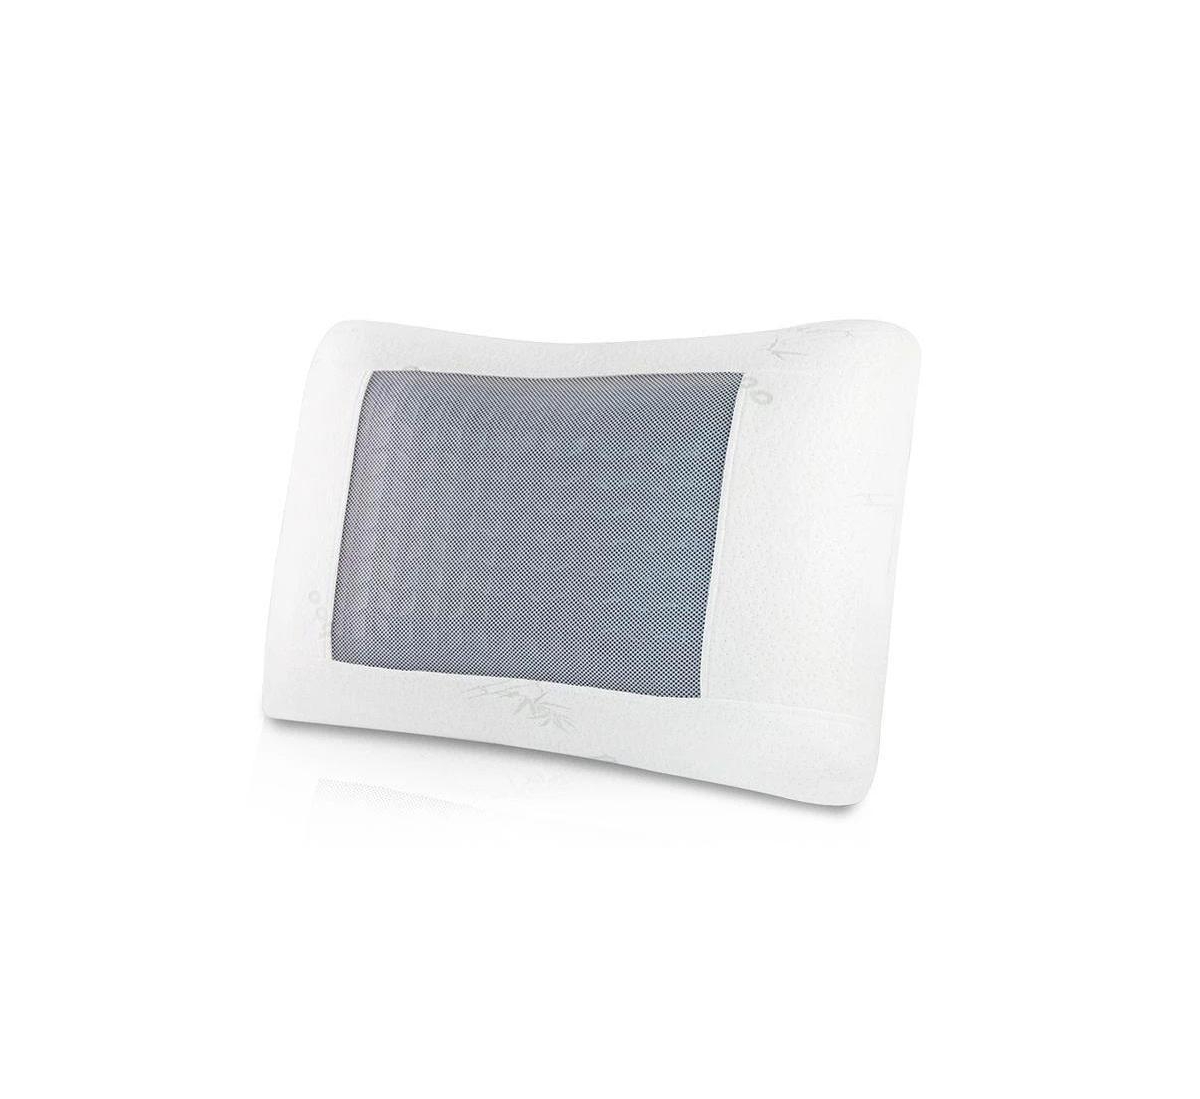 Dr Pillow Hydro Cool Comfort Pillow In White